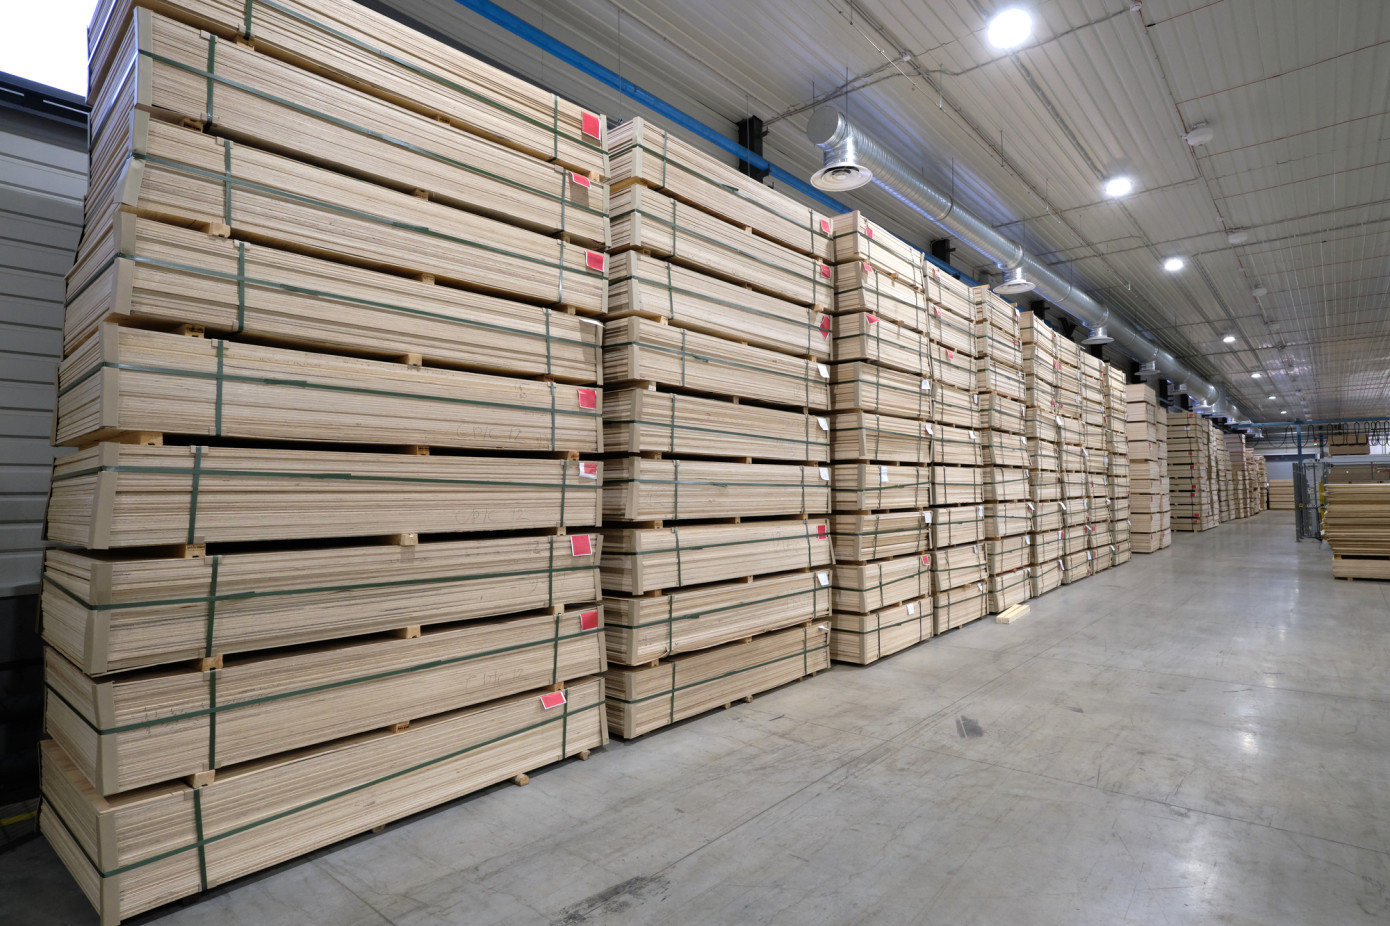 European Commission to investigate possible circumvention of anti-dumping duties and illegal imports of Russian plywood